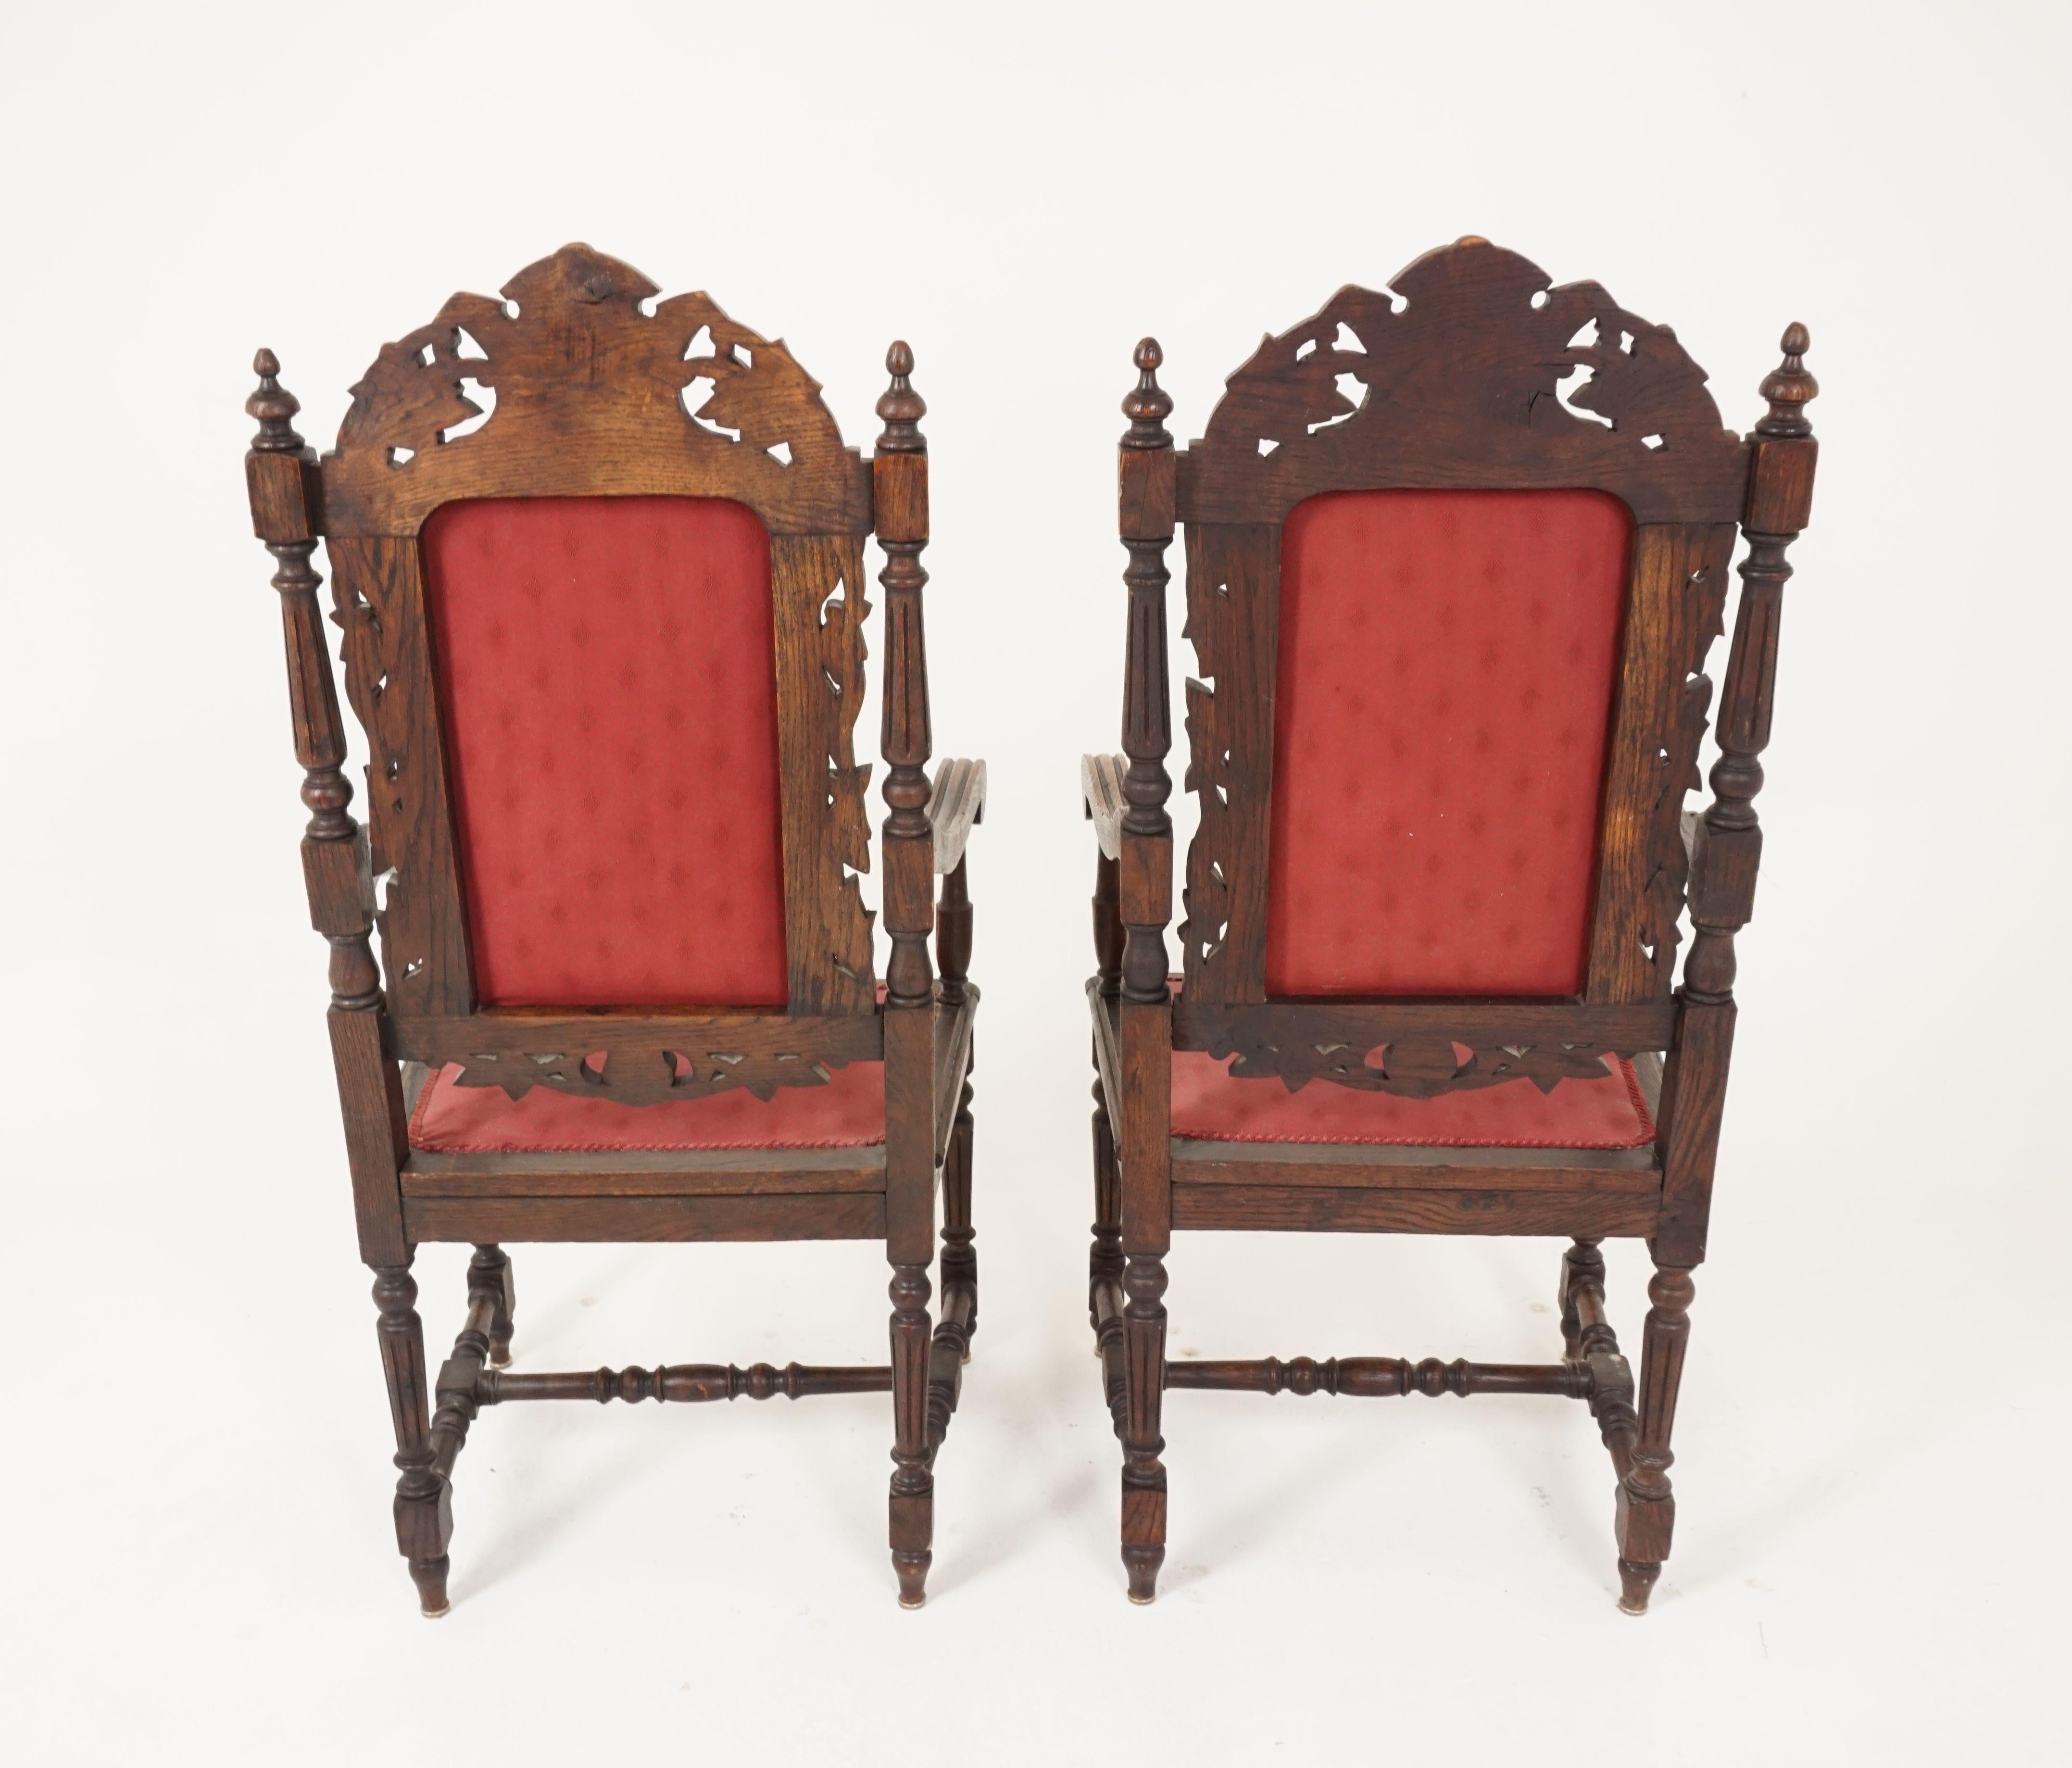 Late 19th Century Antique Pair of Arm Chairs, Hand Carved Oak, Throne Chairs, Scotland 1880, B2415